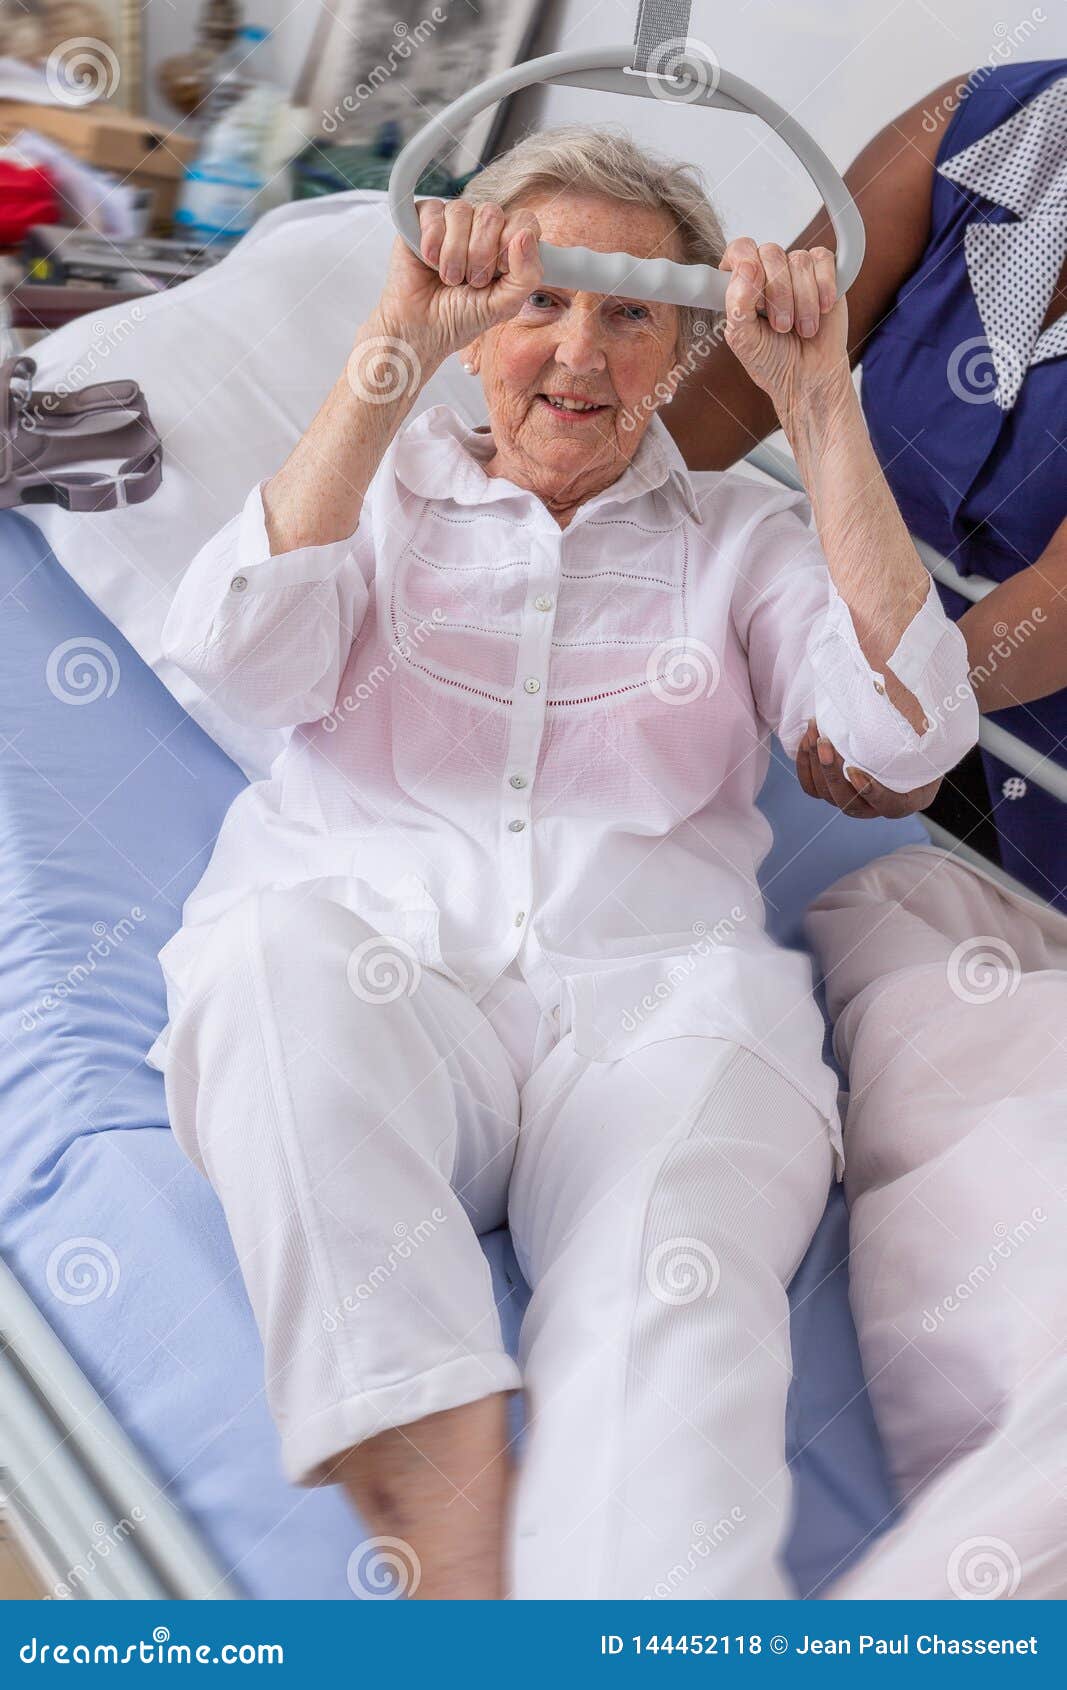 Nurse Helps A Patient To Get Up In Hospital Nurse Helping Senior Woman